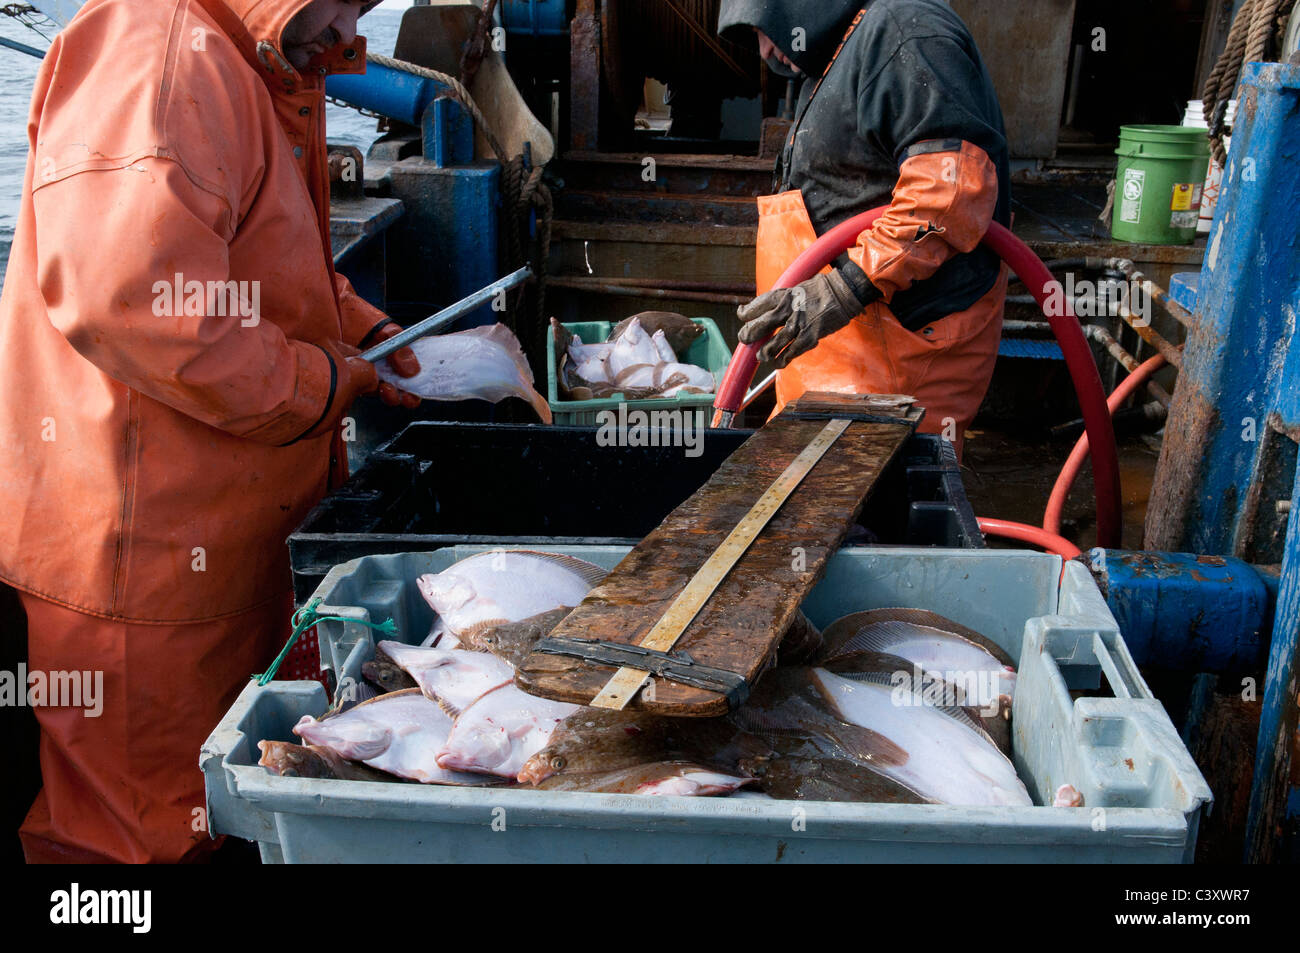 New England fishermen cleaning, washing, and measuring their catch of yellowtail flounder (Limanda ferruginea). Stock Photo